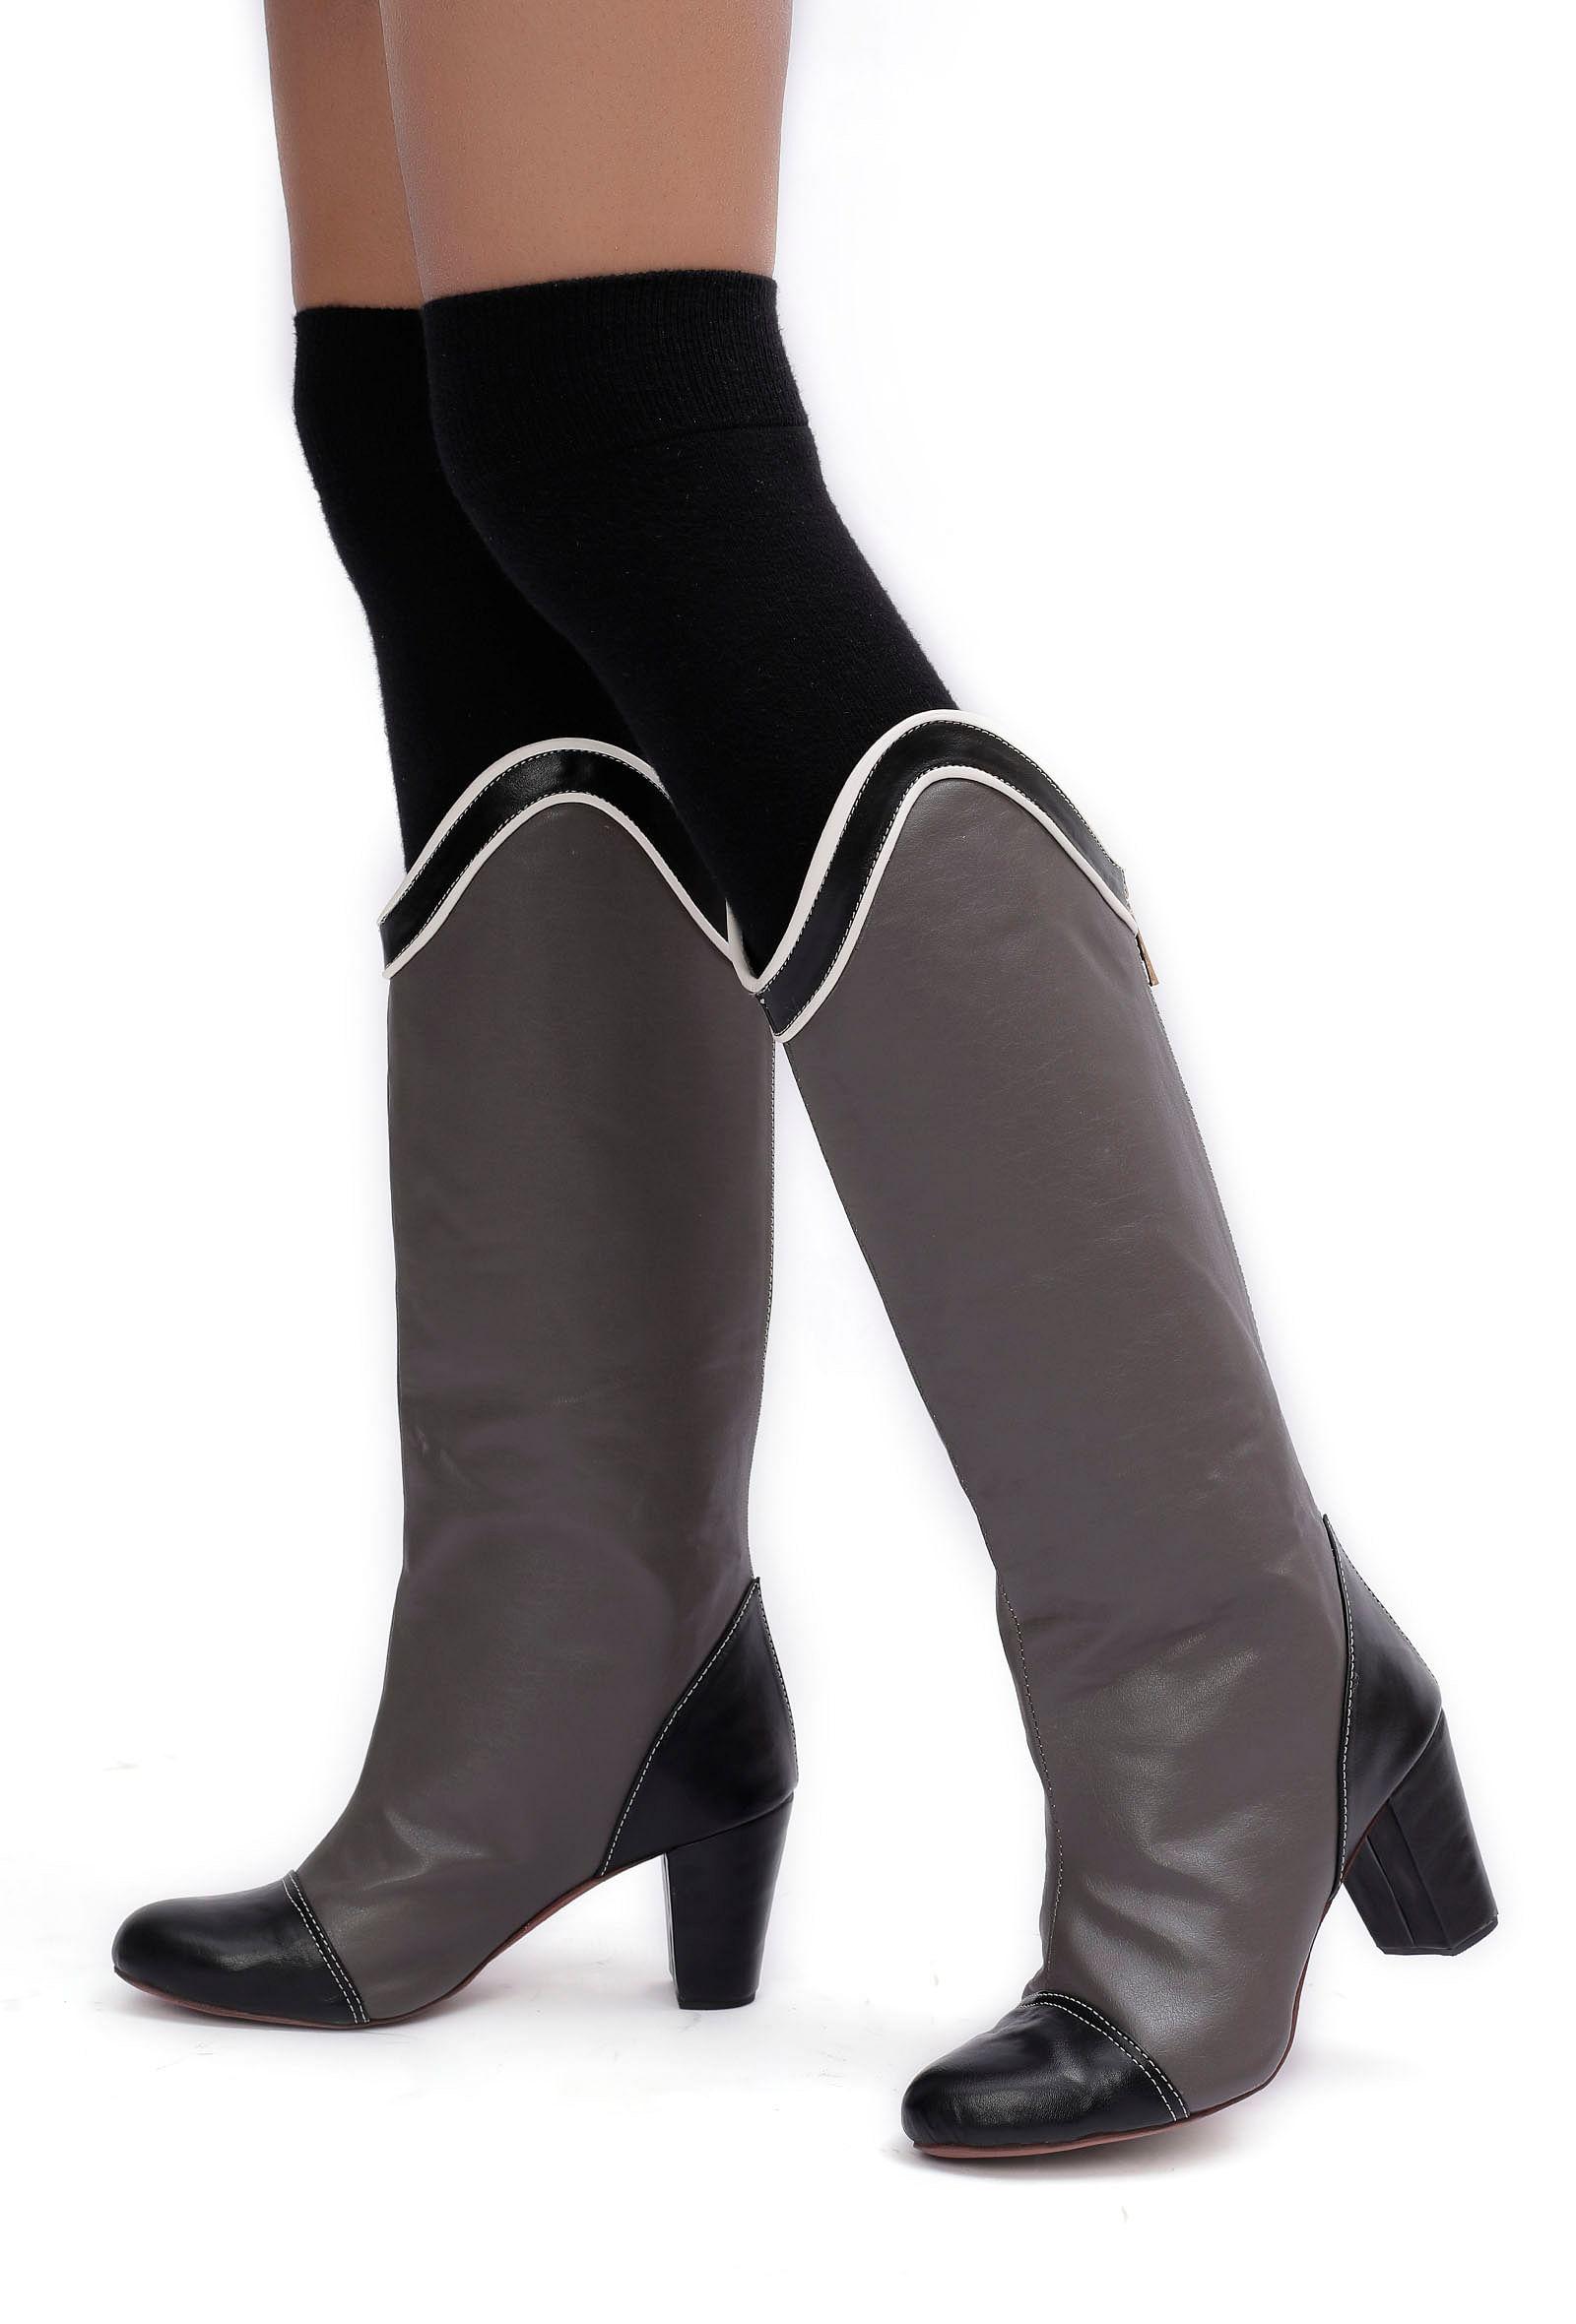 dusty-grey-and-black-cruelty-free-leather-long-boots